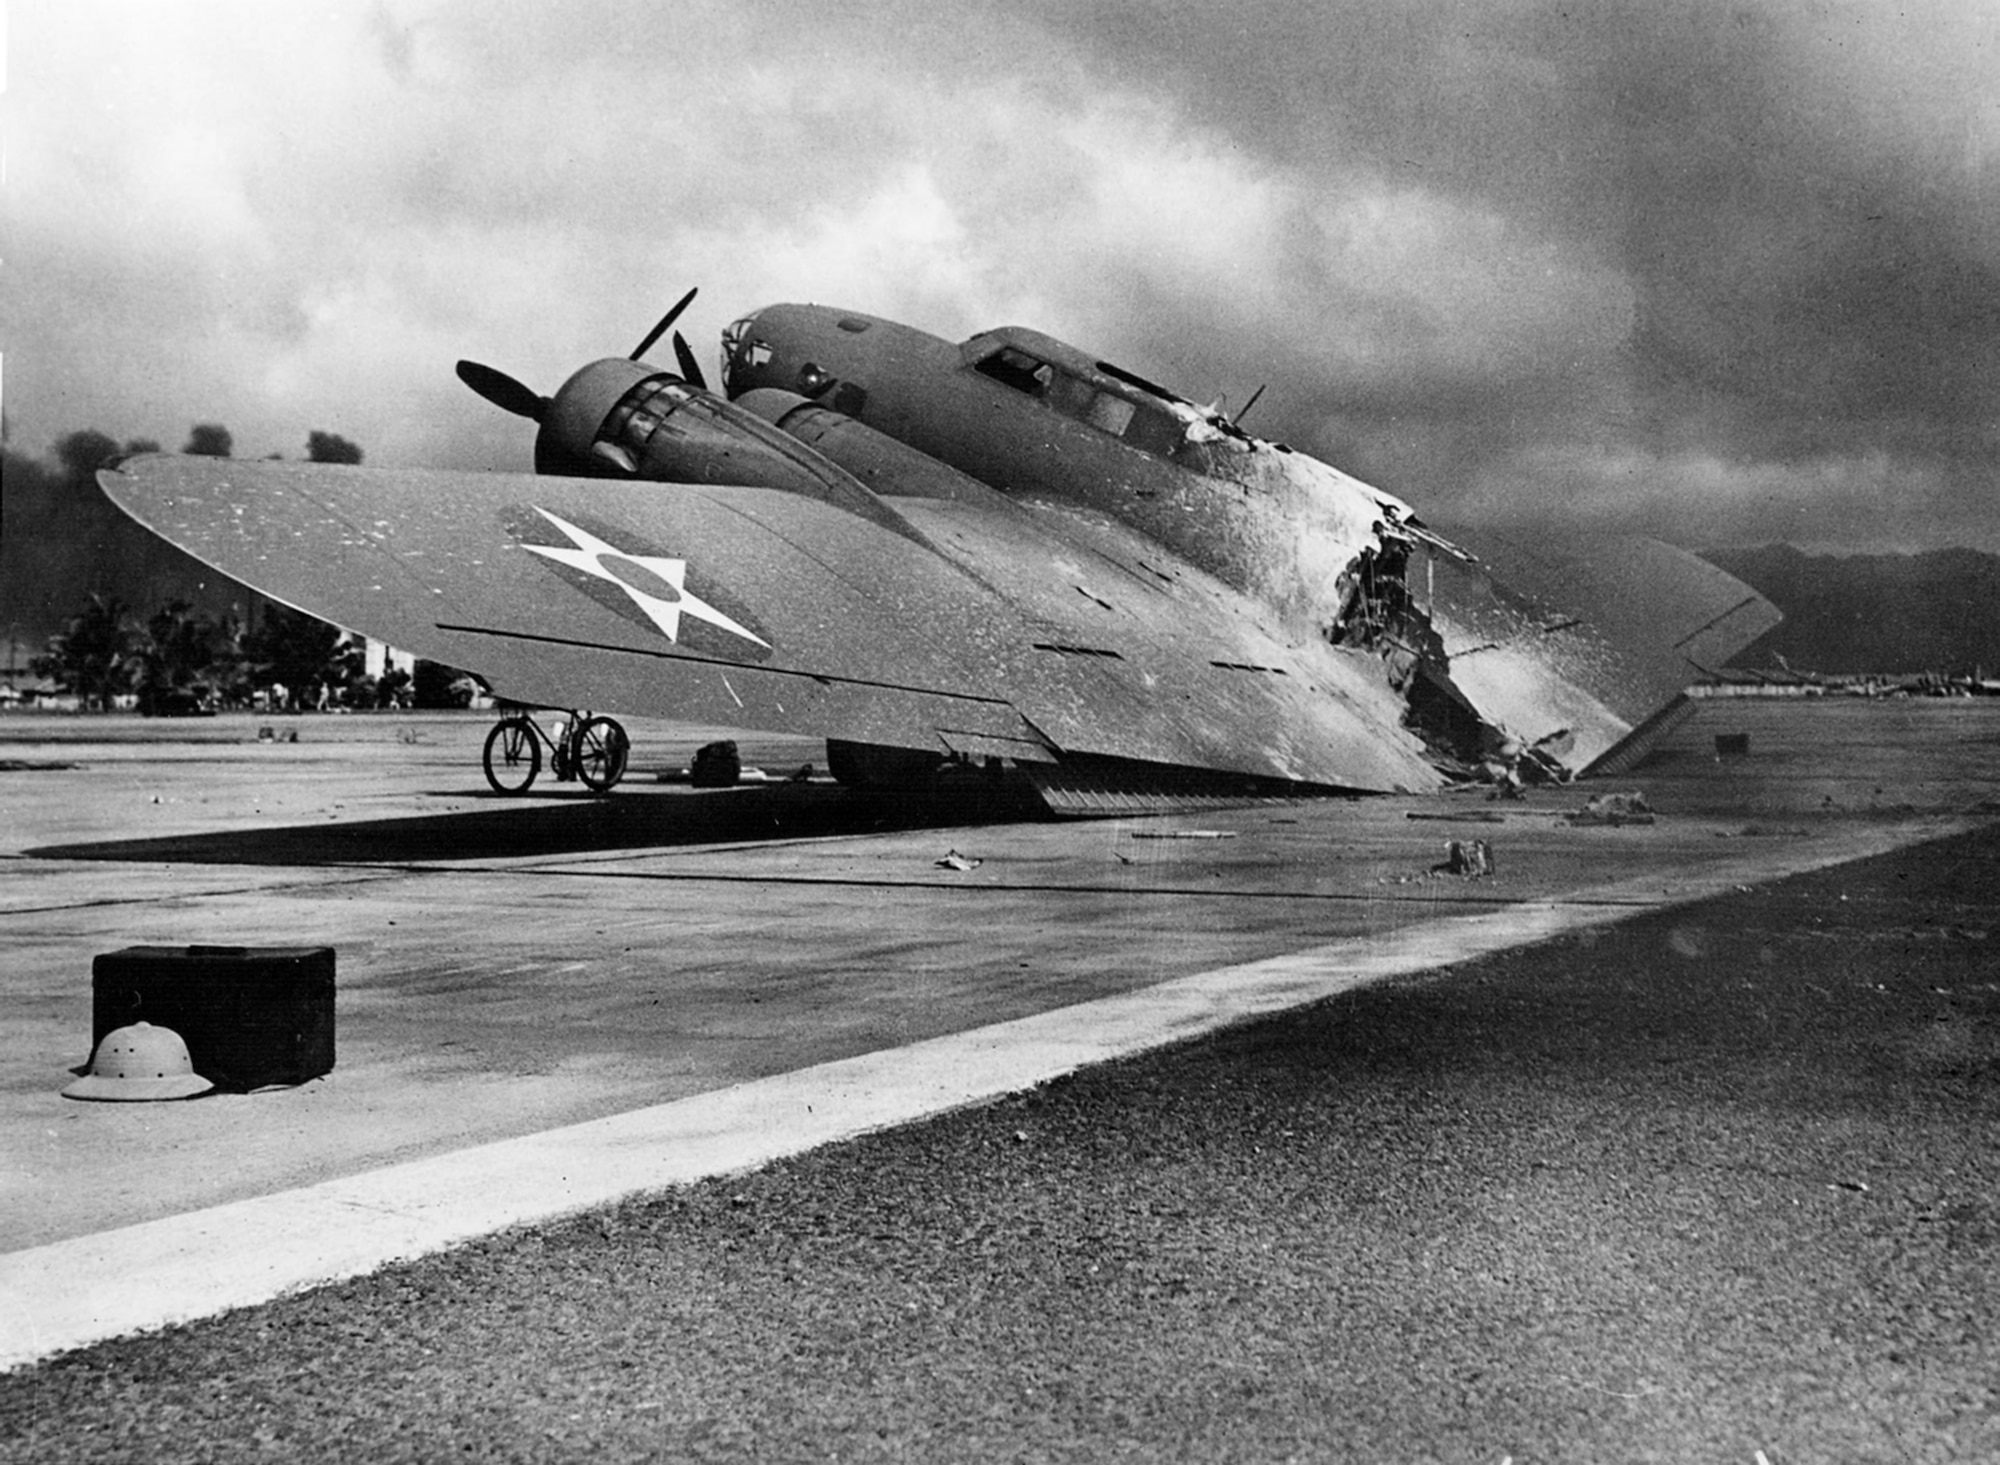 A burned U.S. Army Air Corps Boeing B-17C Flying Fortress (s/n 40-2074) rests near Hangar 5, Hickam Field, Hawaii, on 7 December 1941. It was one of 12 flown to Hickam from Hamilton Field, Calif., and arrived during the attack. On its final approach, the aircraft’s magnesium flare box was hit by Japanese strafing and ignited. The burning plane separated upon landing. The crew survived the crash, but a flight surgeon was killed by strafing as he ran from the burning wreck. (Courtesy Photo/National Archives and Records Administration)